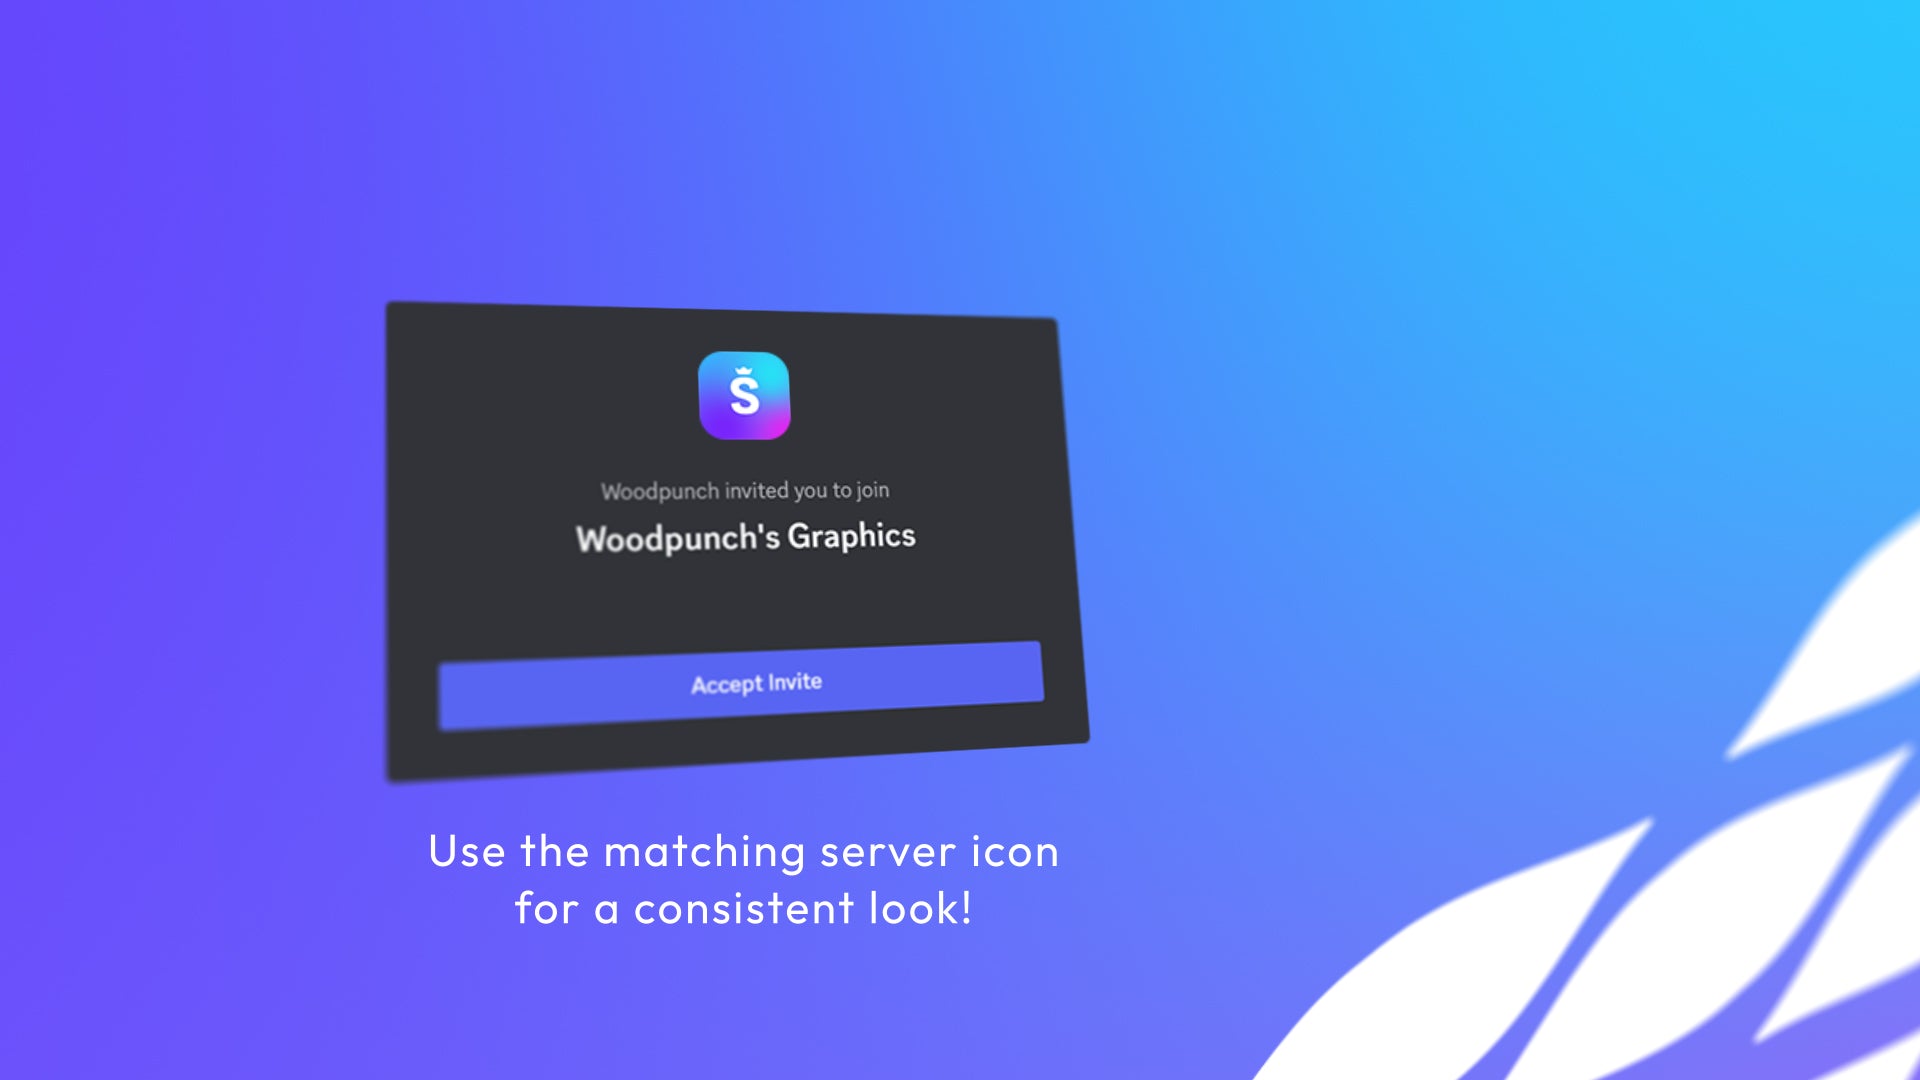 Matches with a server icon